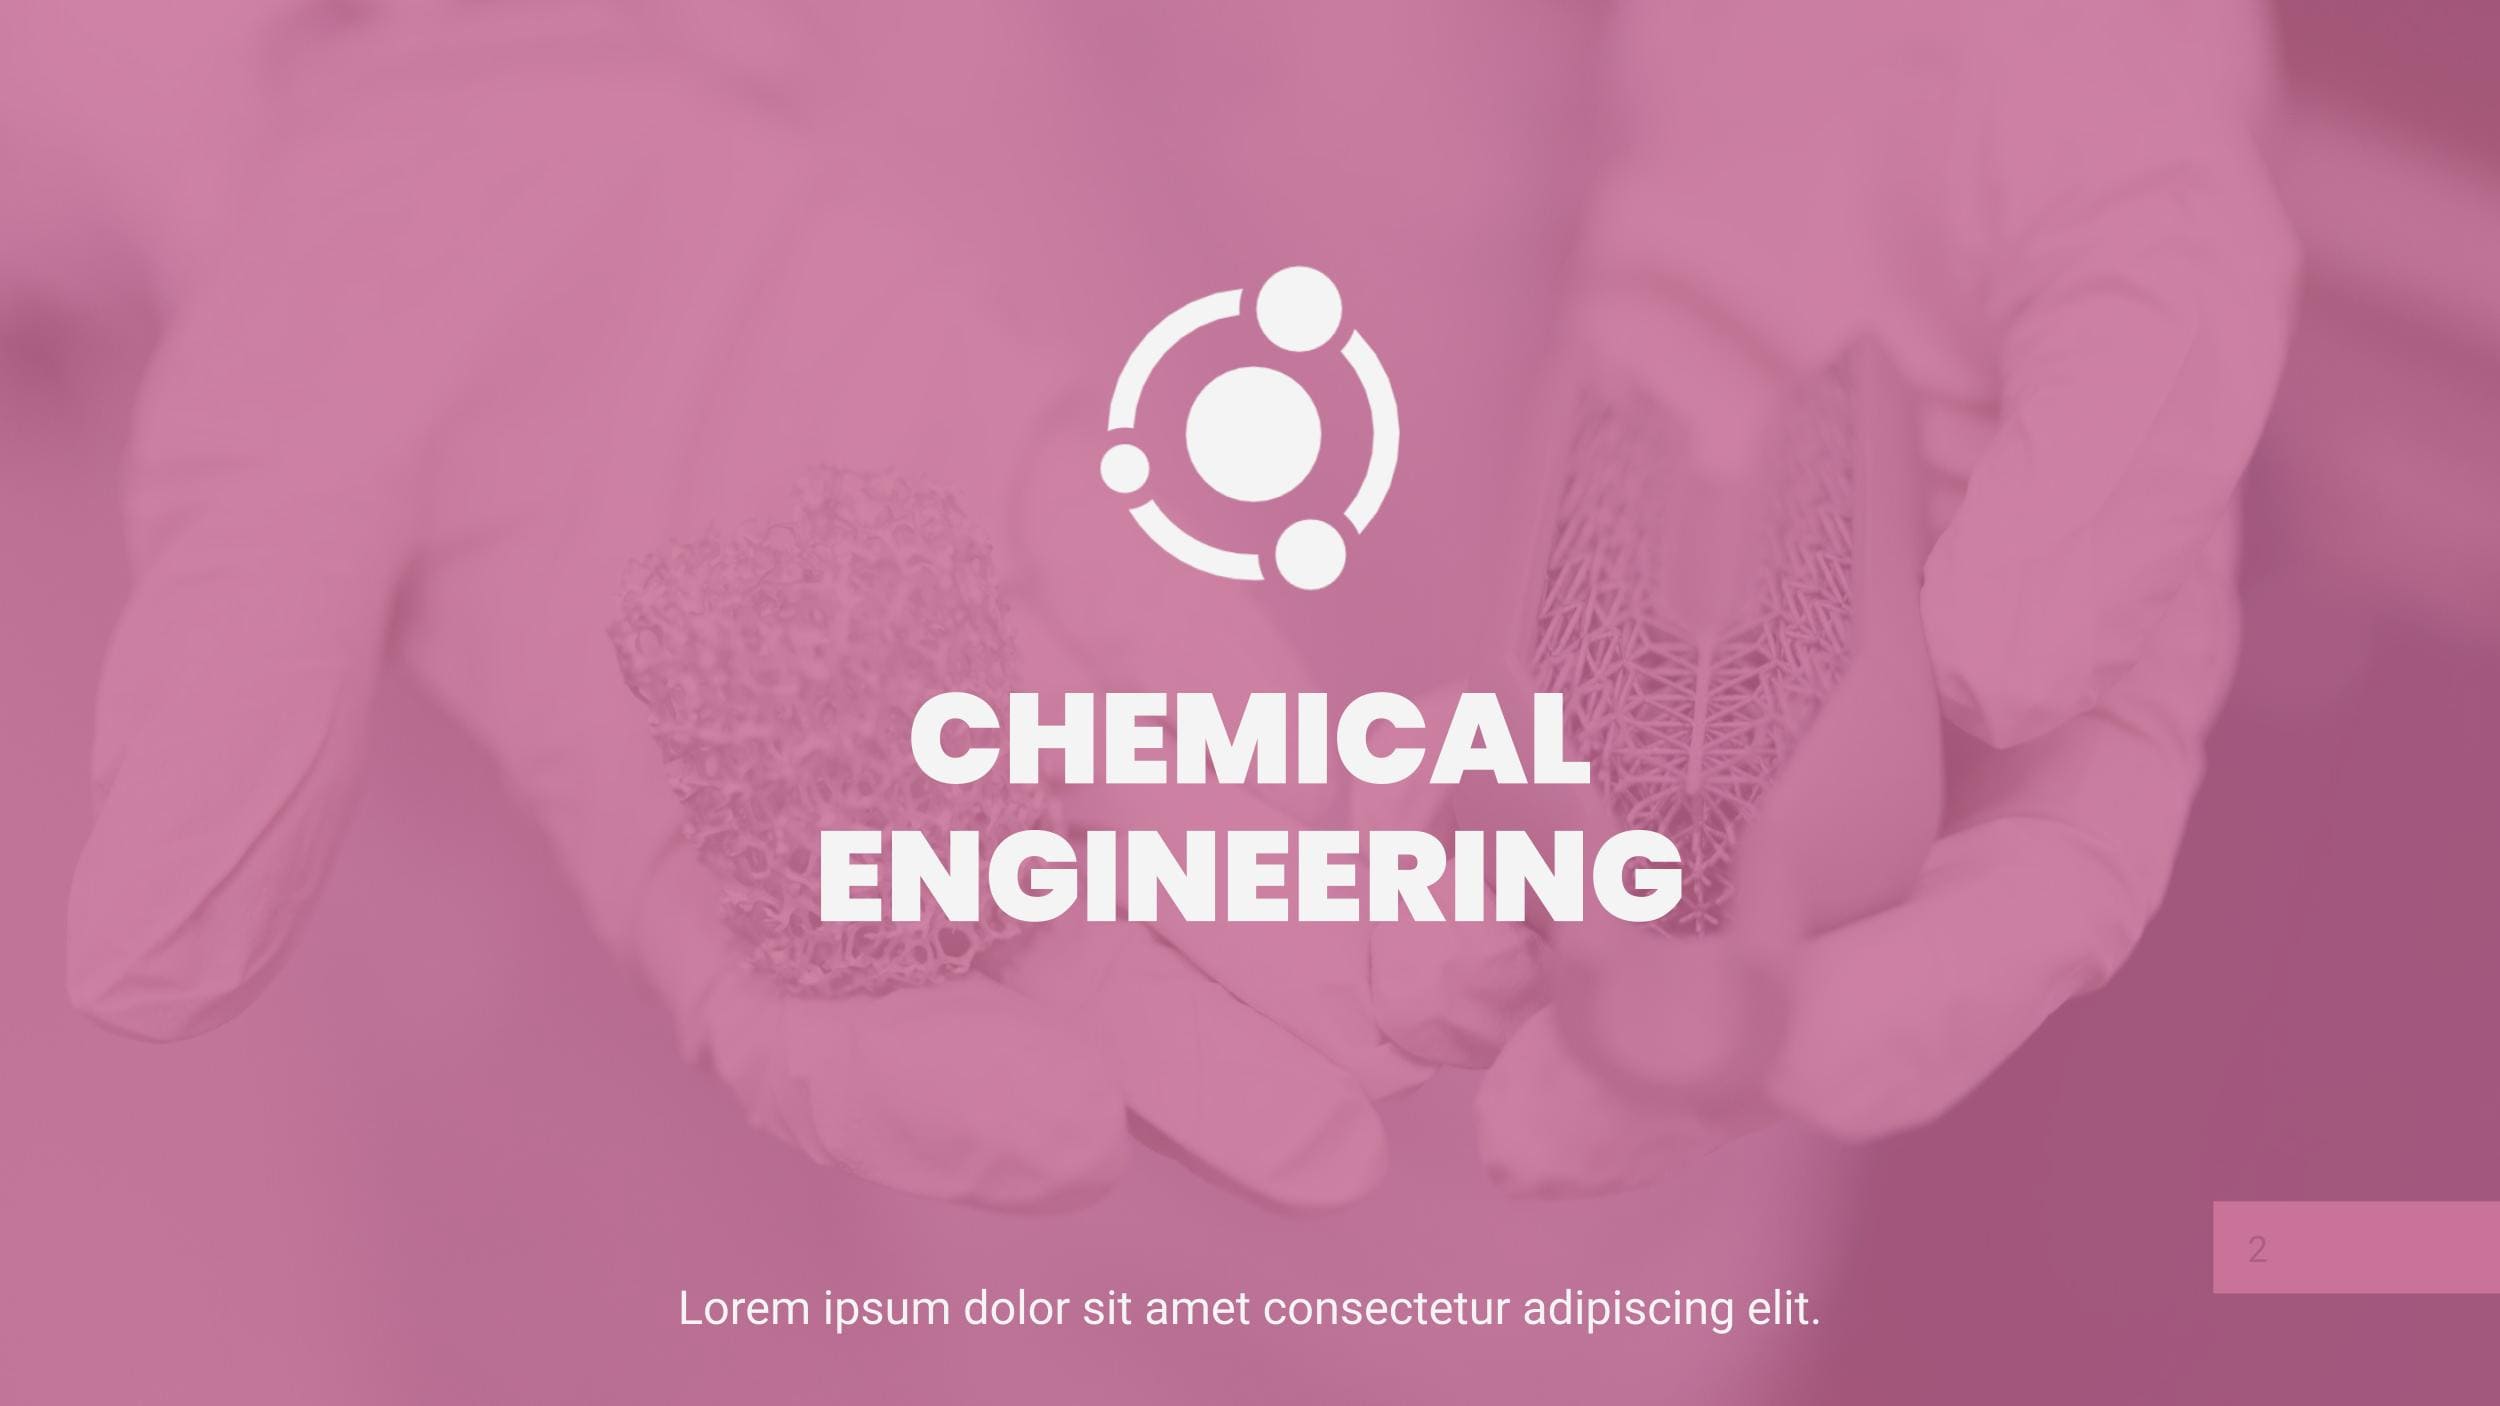 ChemicalEngineering Powerpoint Template.